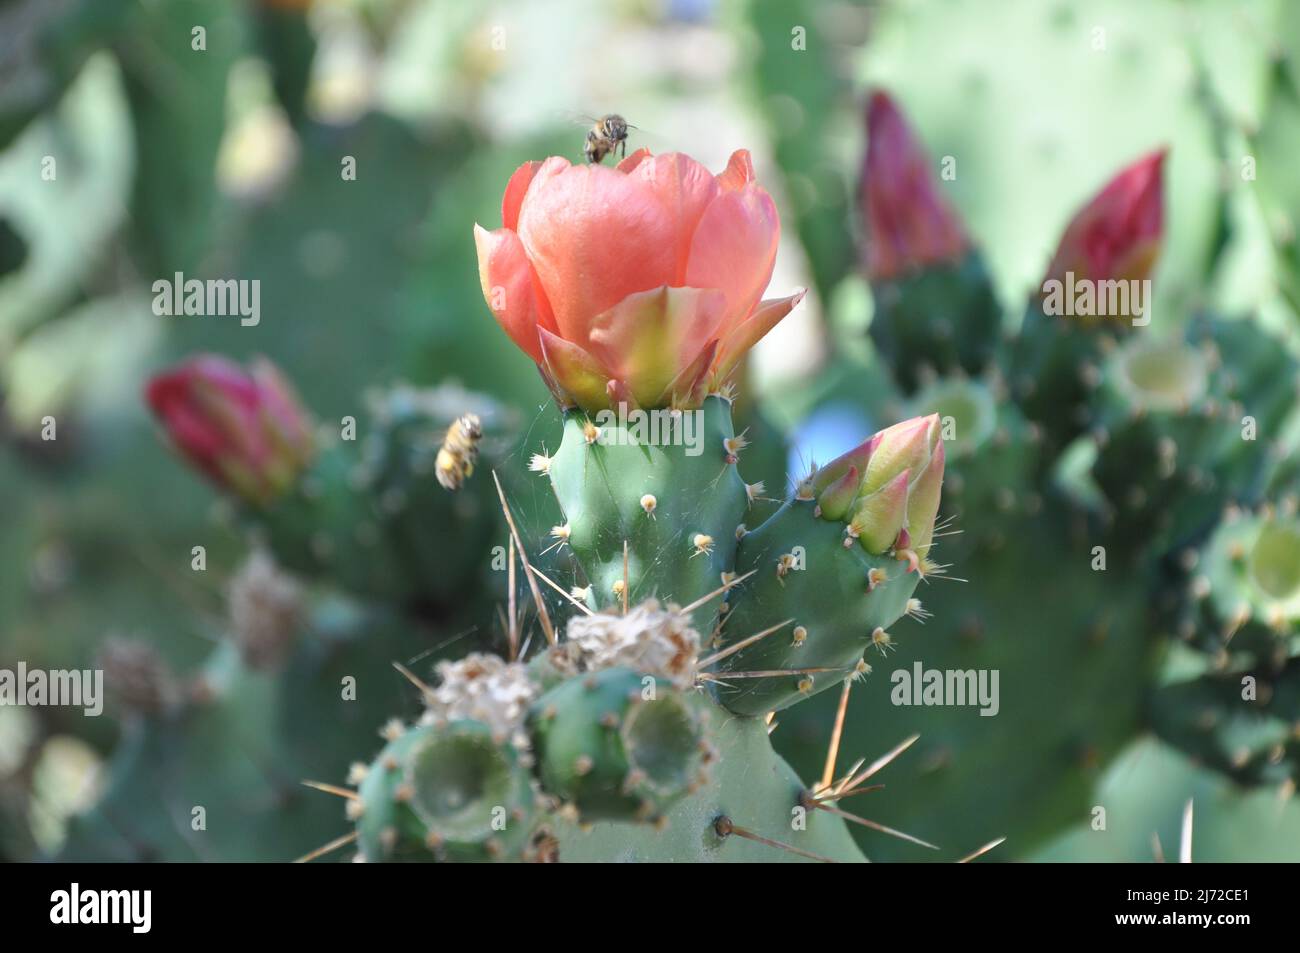 Indian fig opuntia, barbary fig, cactus pear in blossom. Prickly pears cactus.Opuntia ficus-indica with pink flowers. Stock Photo